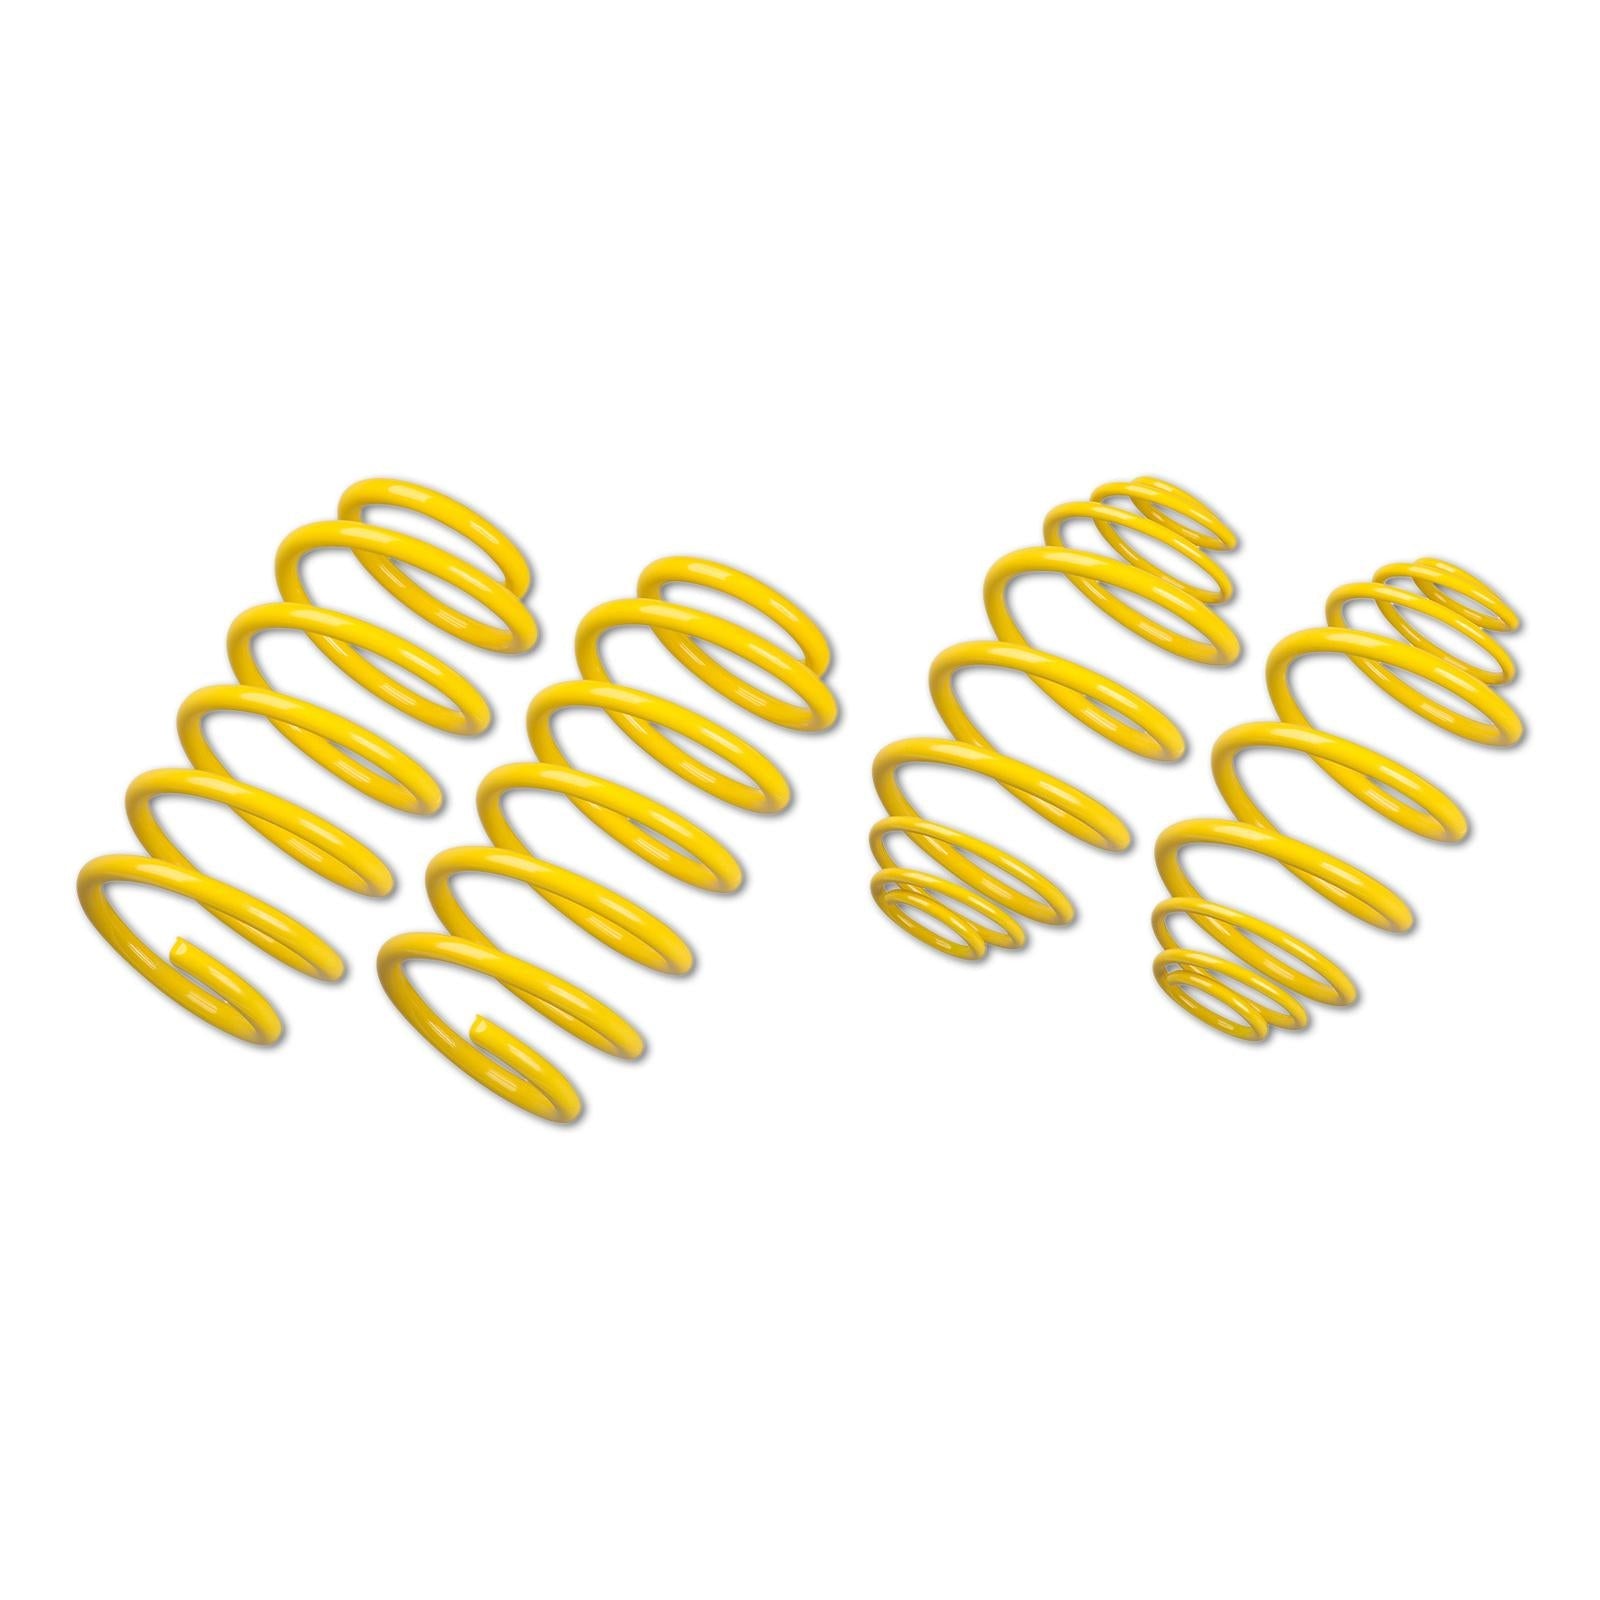 ST Suspensions Lowering Springs - Audi B6/B7 A4 Sedan 2WD Without Auto Leveling System